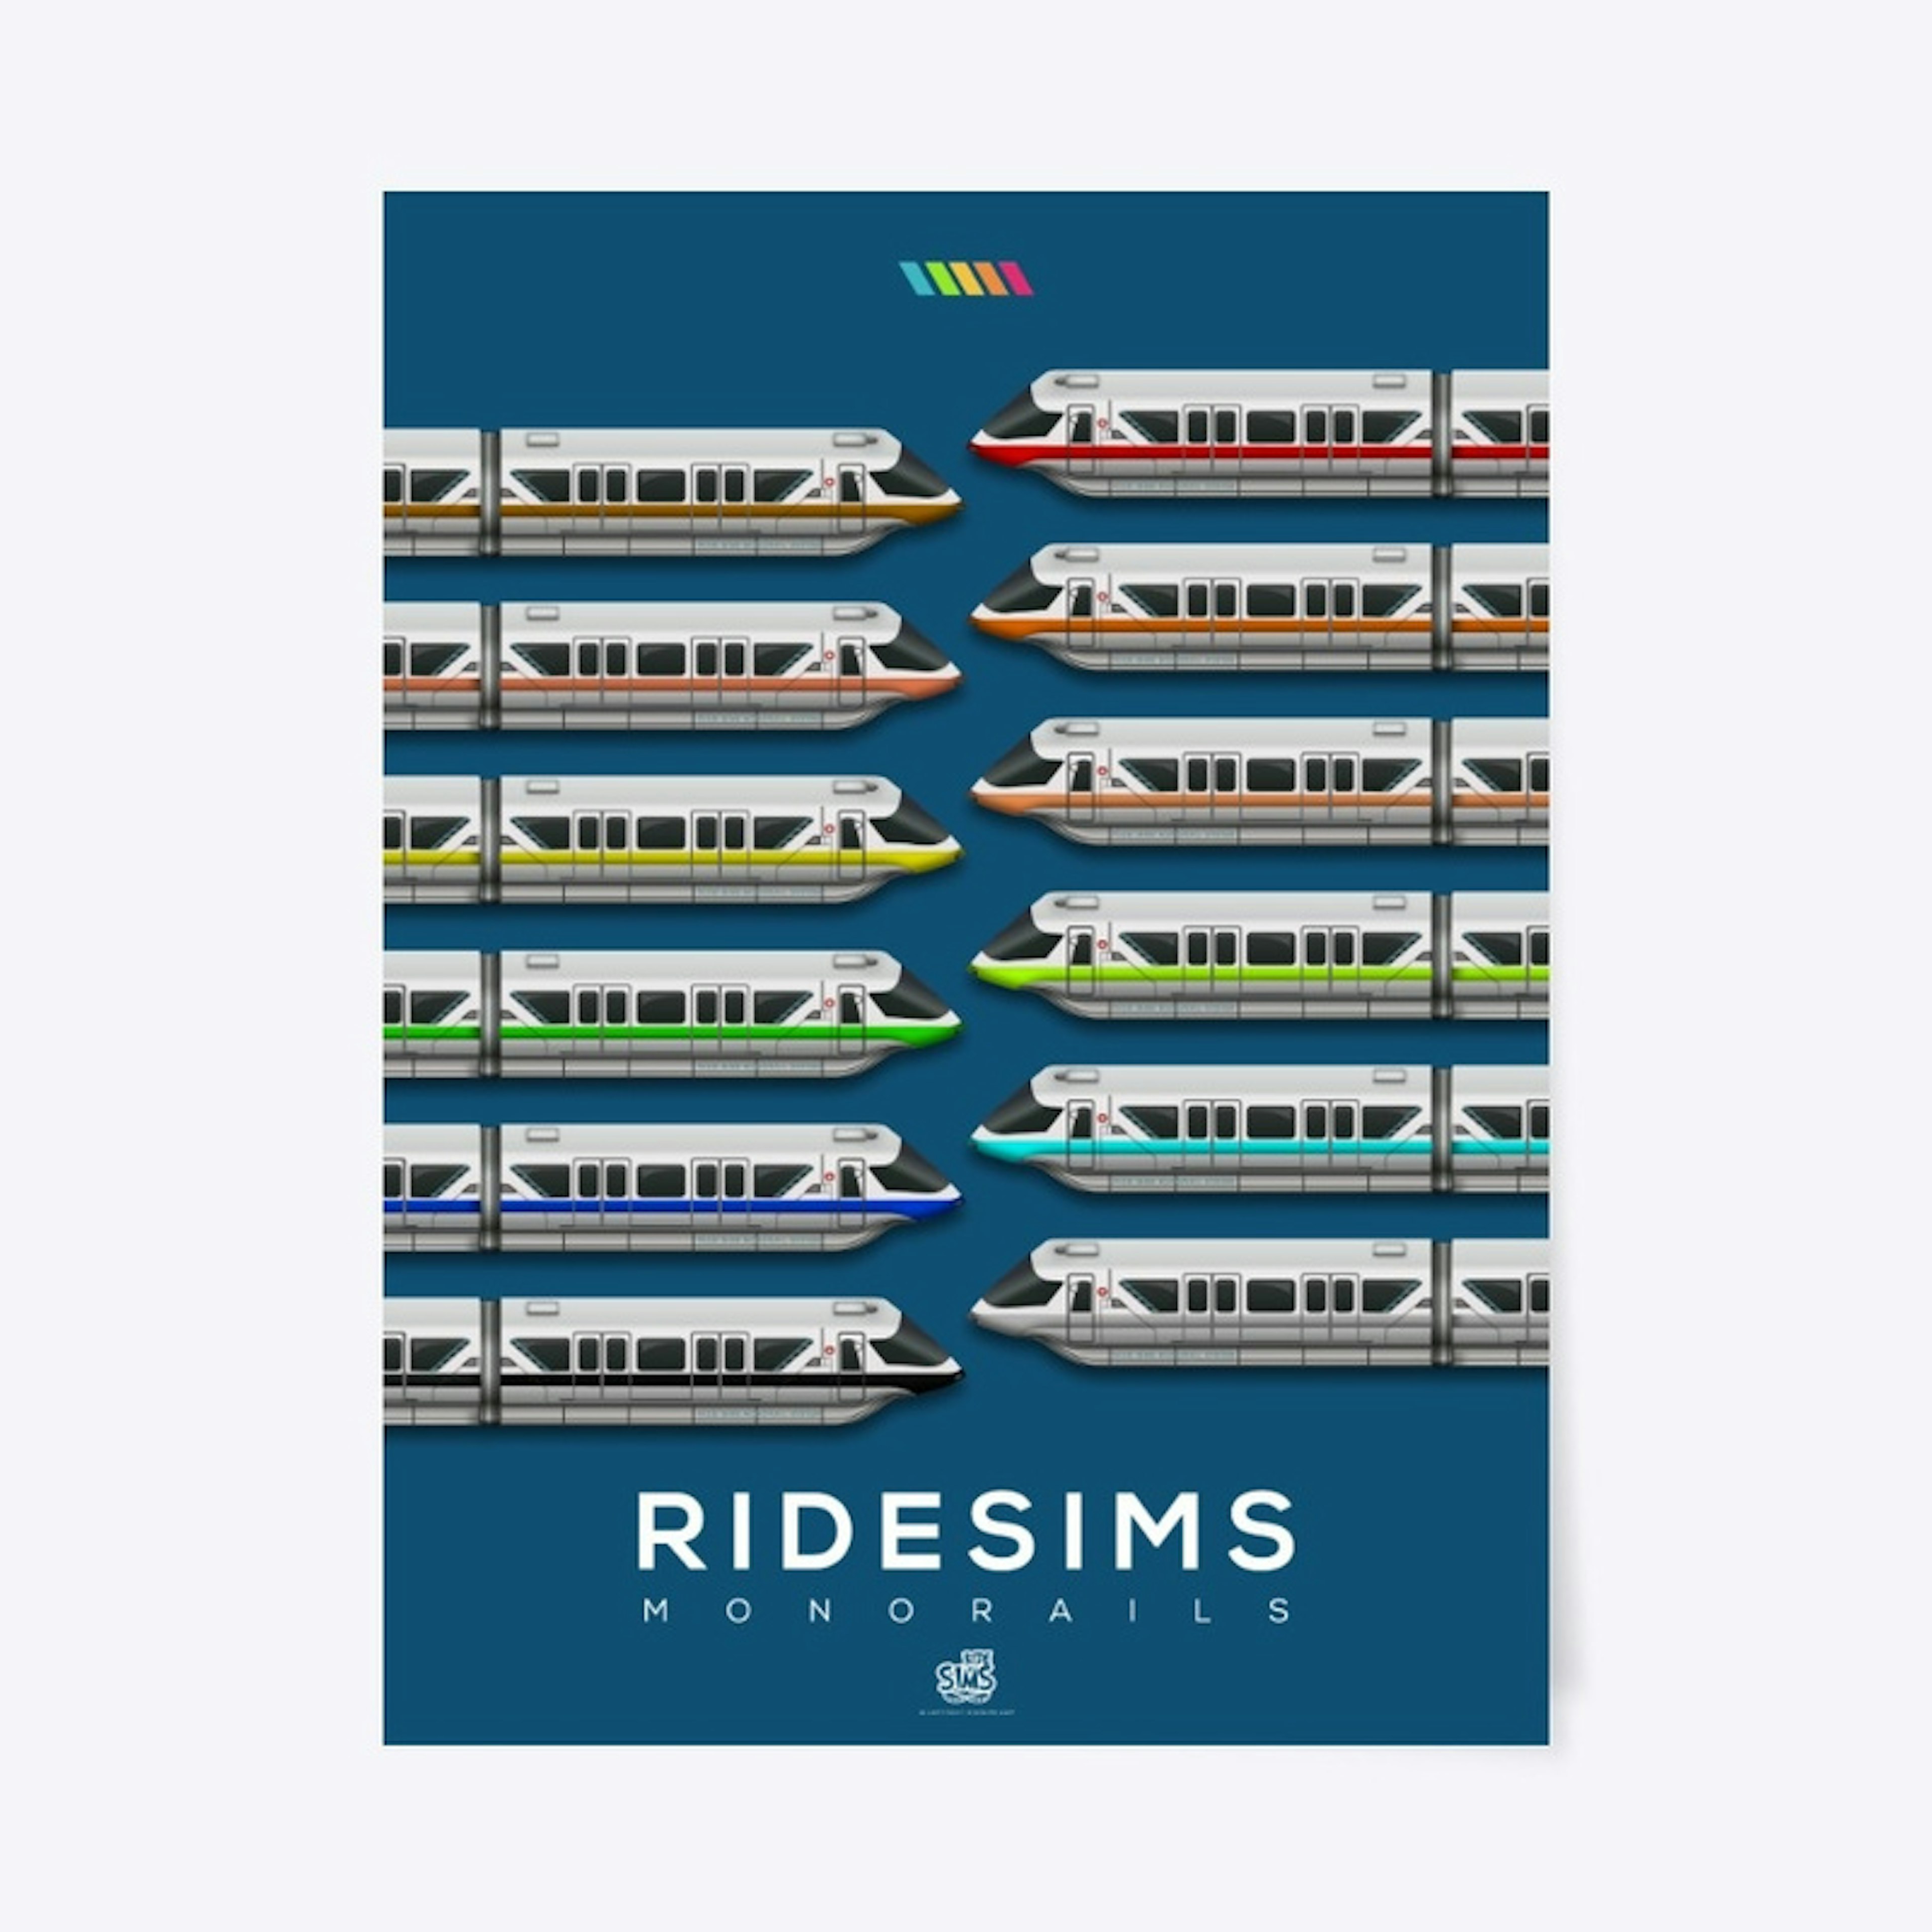 Ride Sims Monorail Poster